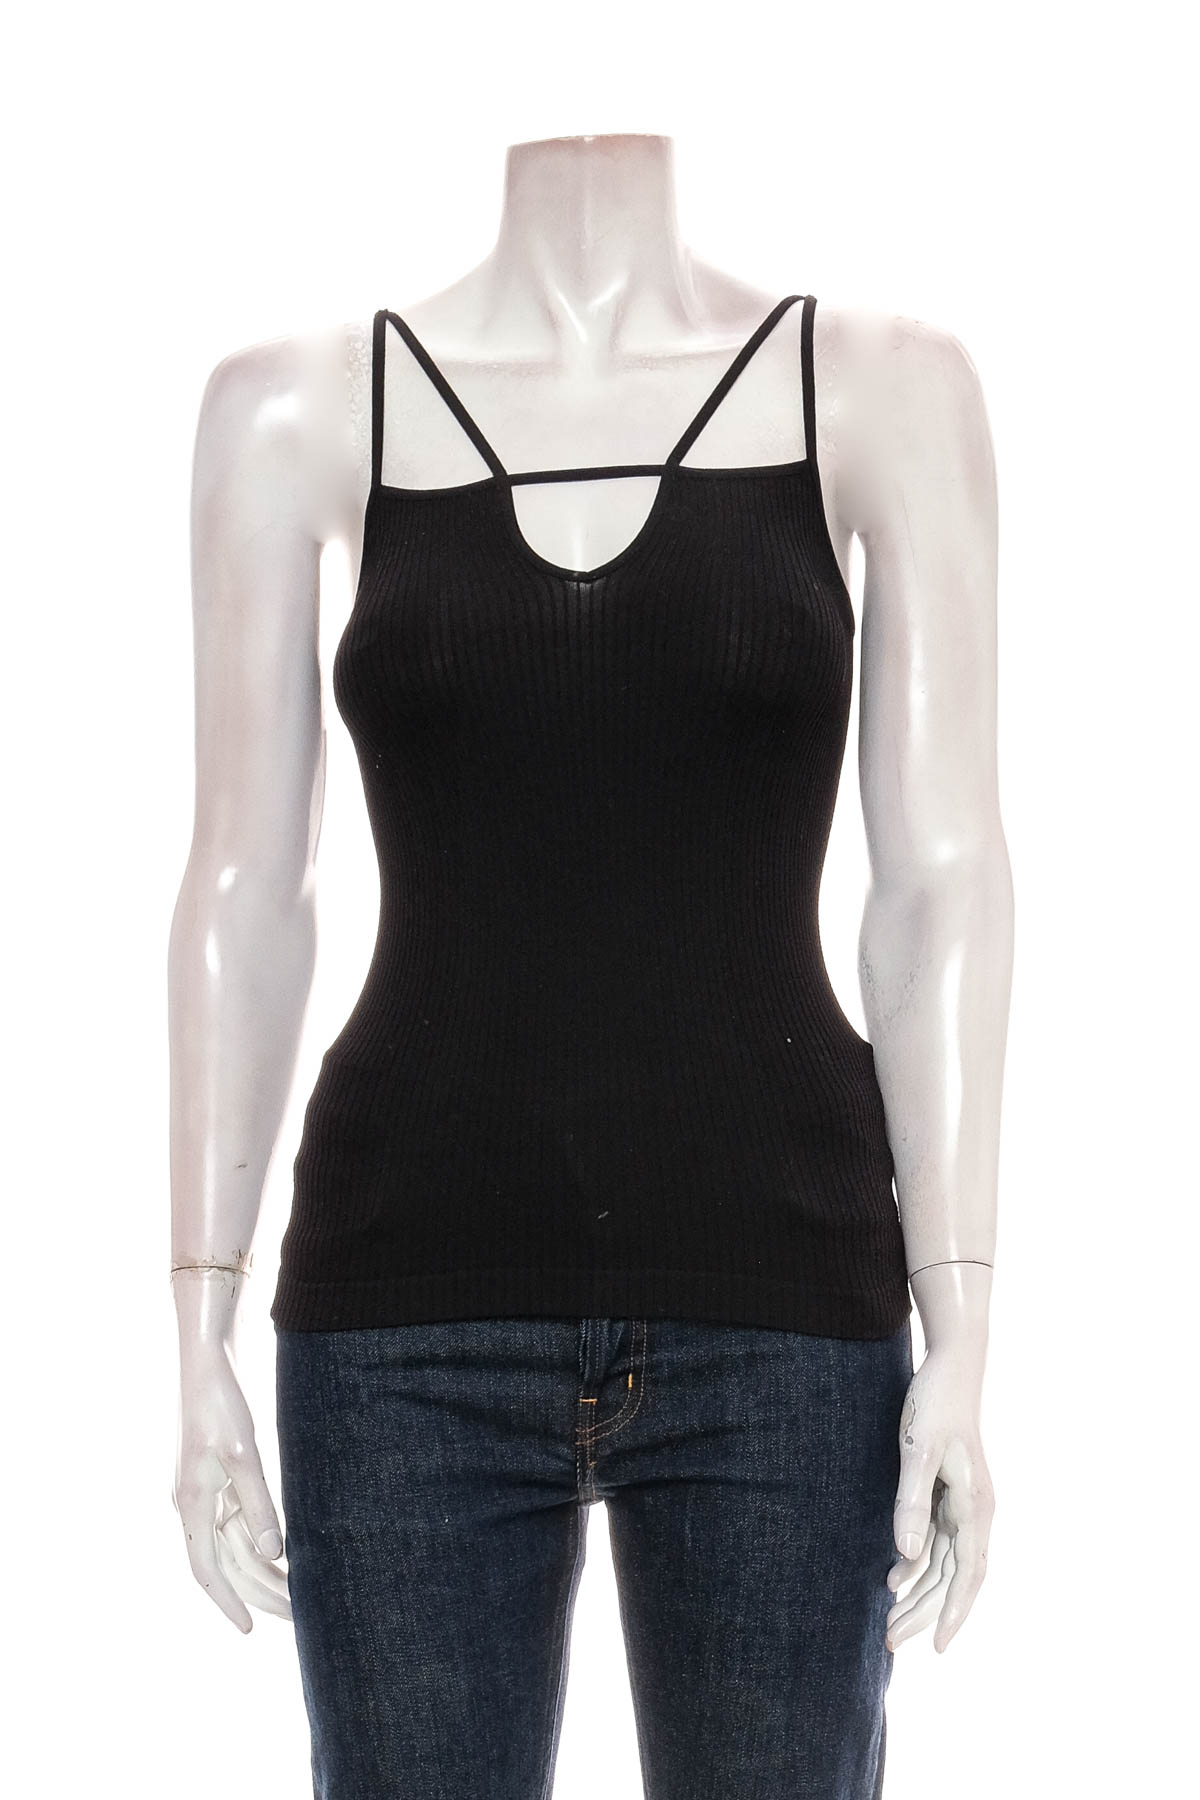 Women's top - Intimately Free People - 0